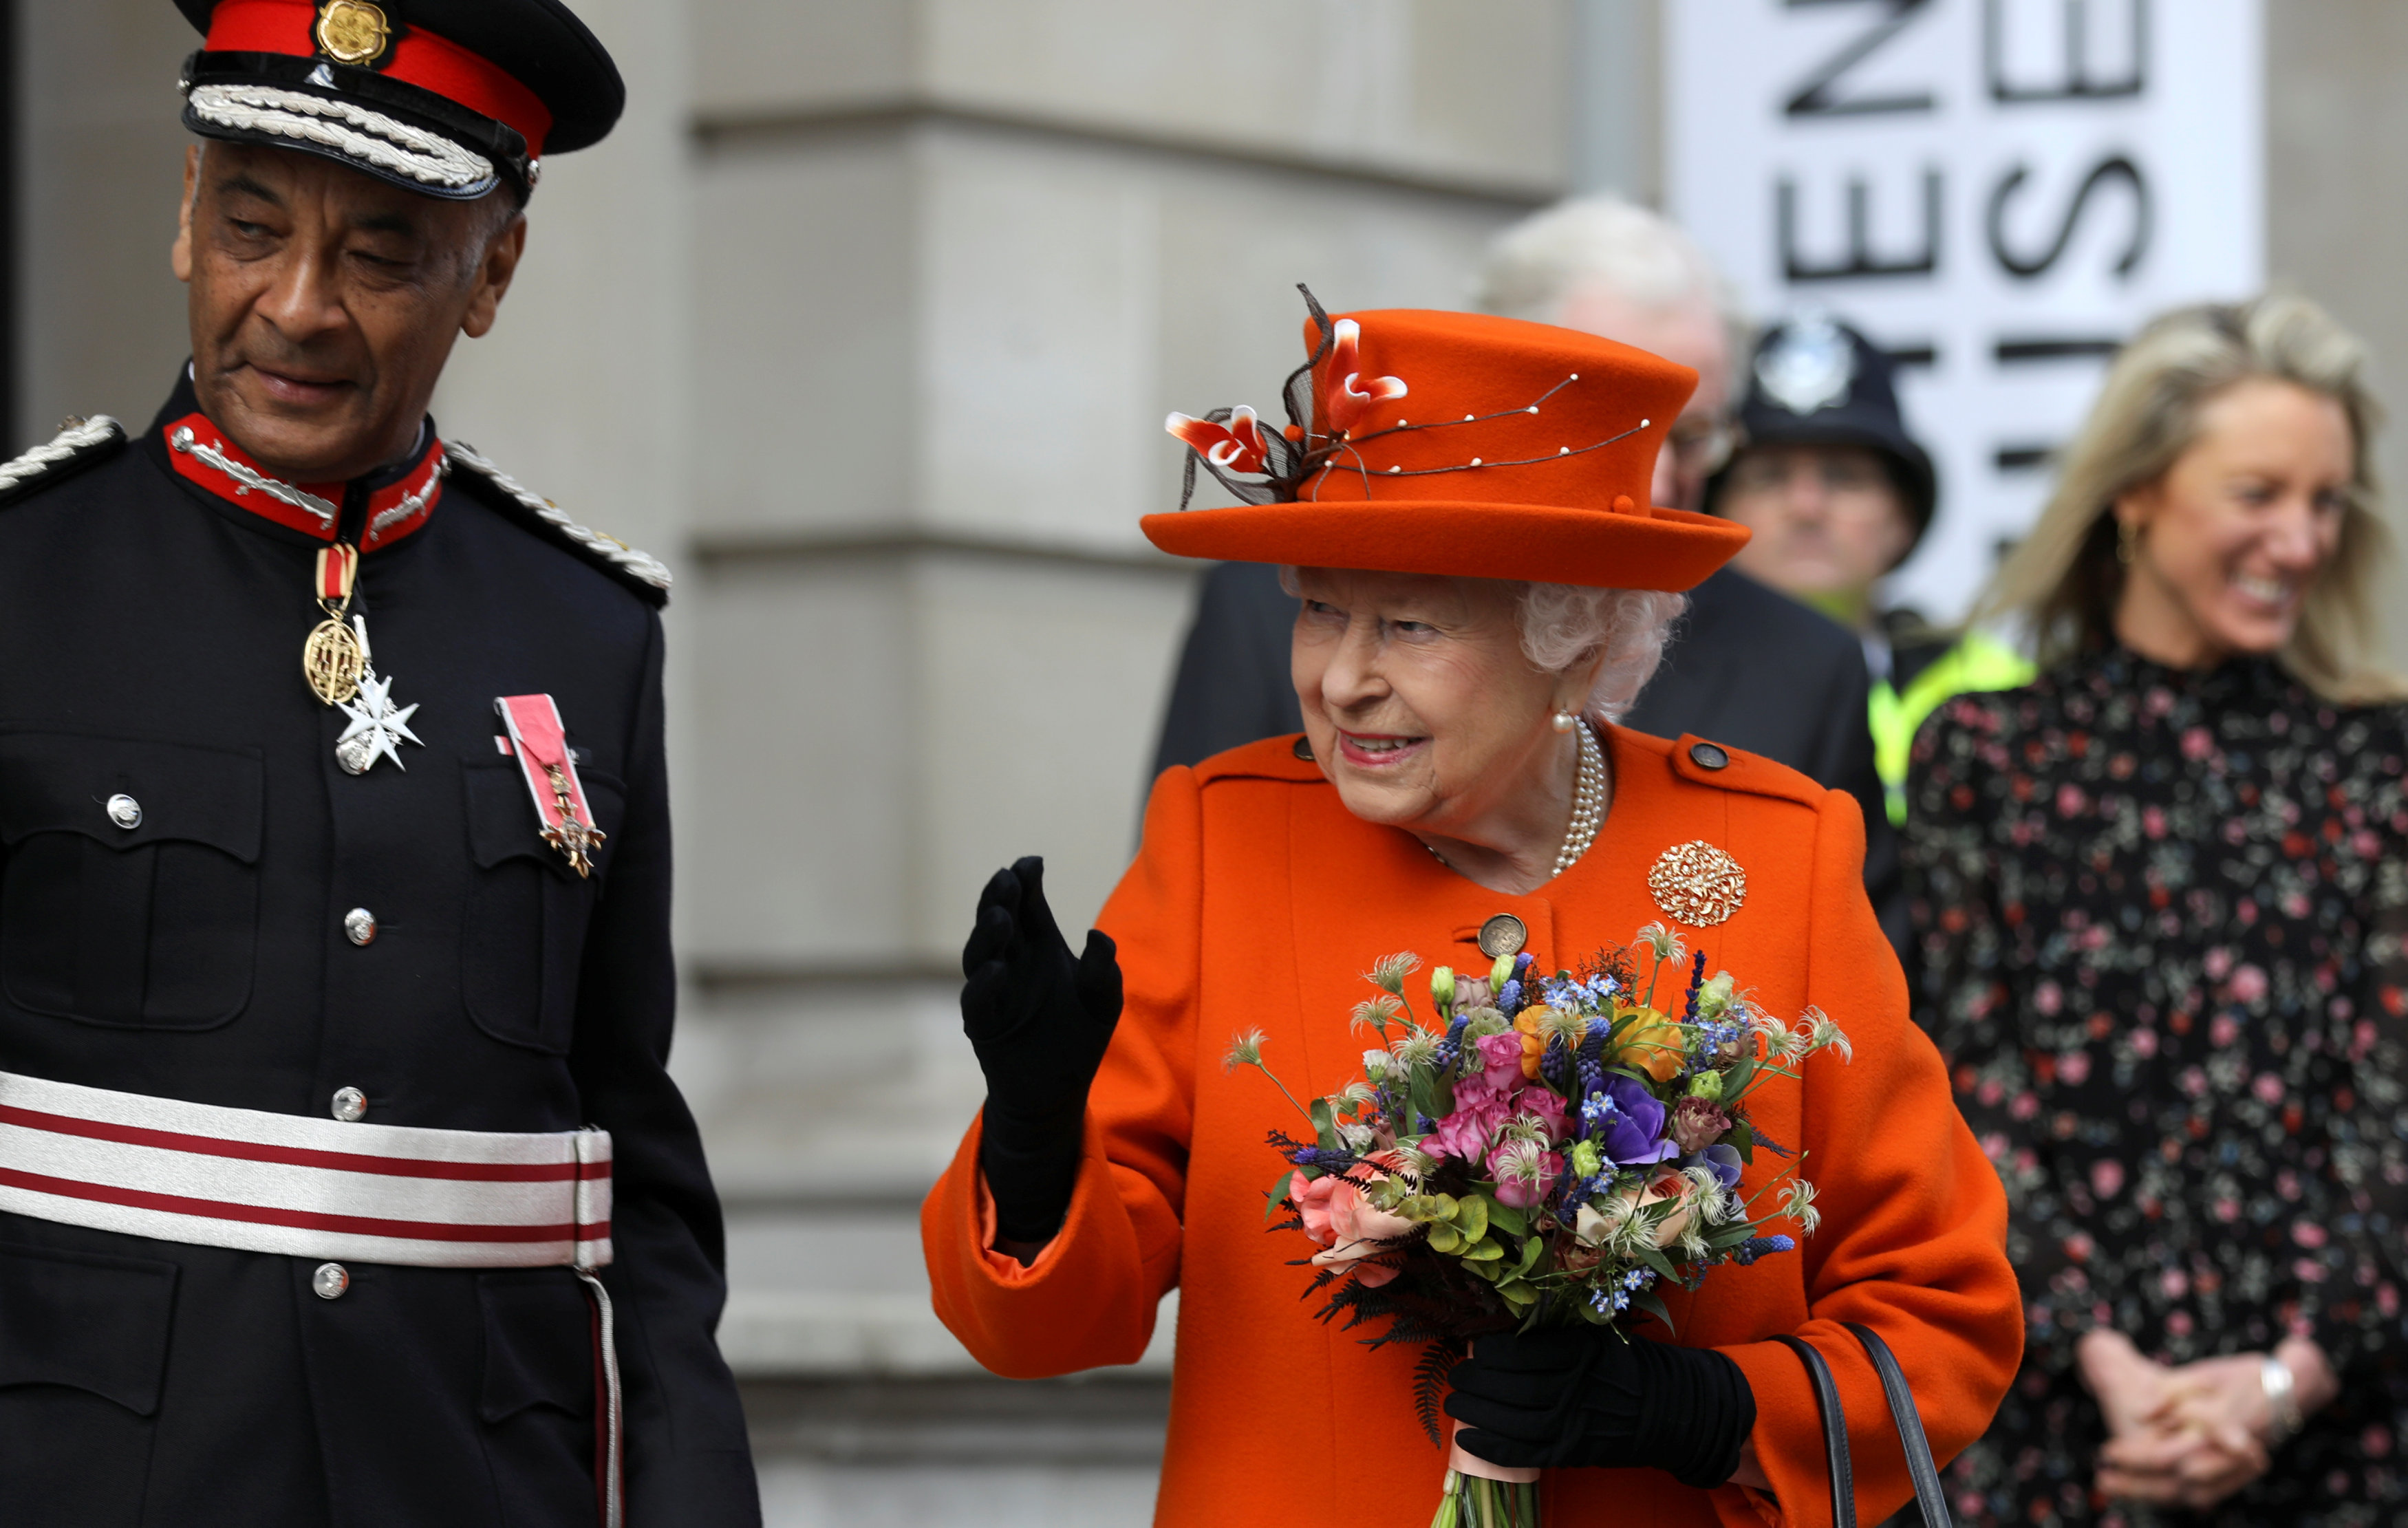 The Queen at the science museum 2019